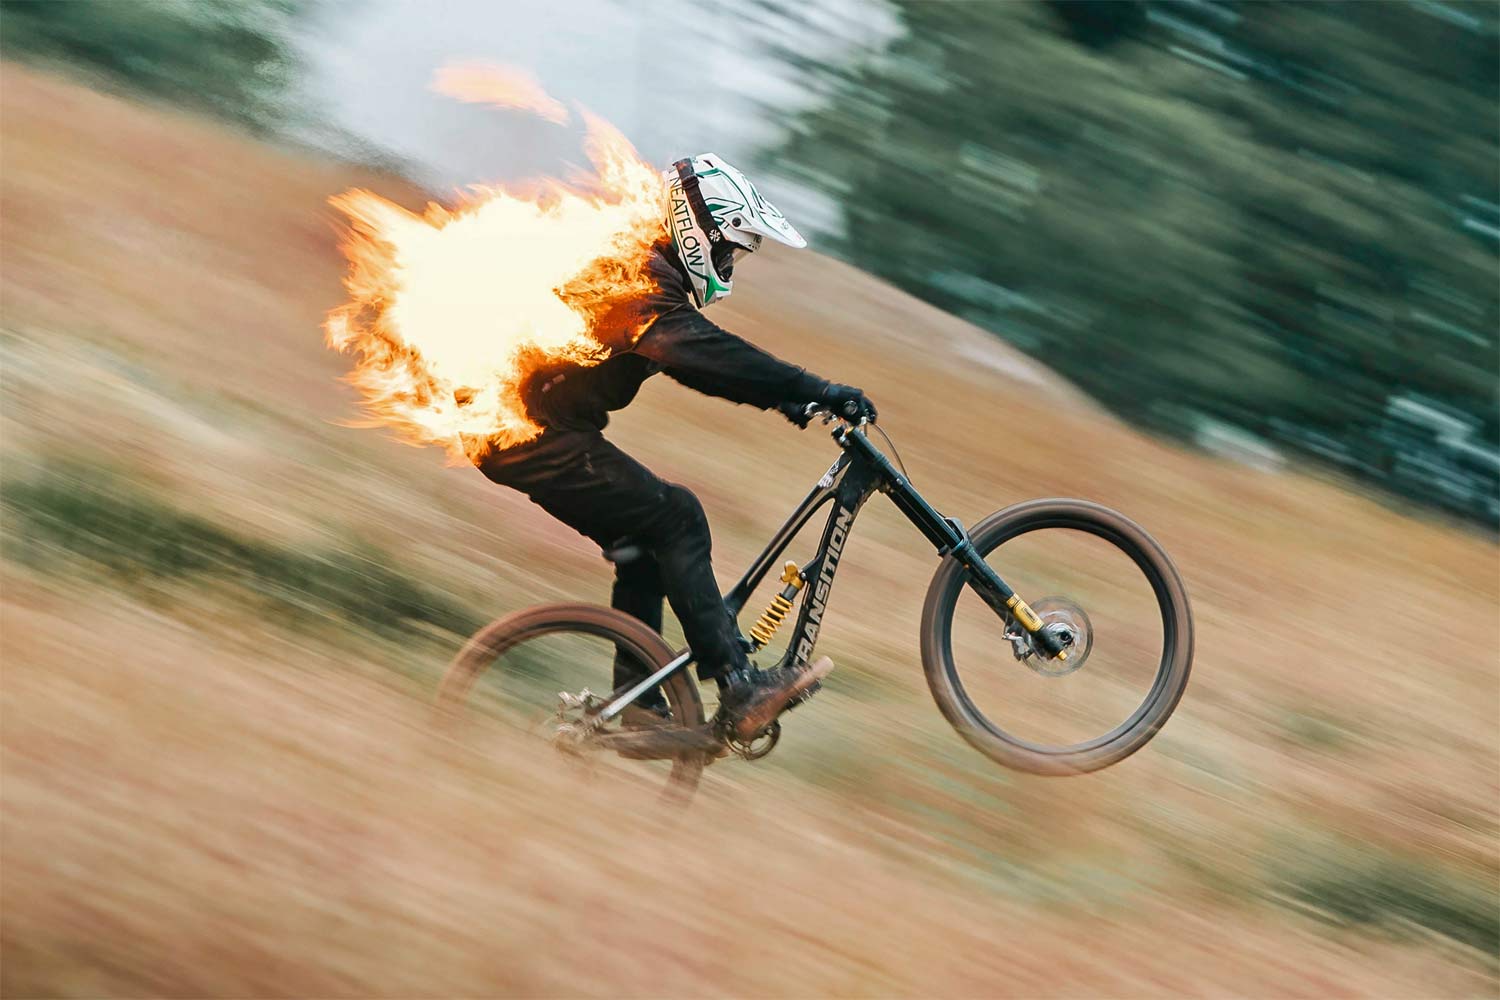 The Old World bike film by Tillmann Brothers for Red Bull, Nico Vink flaming manual photo by Julian Mittelstädt